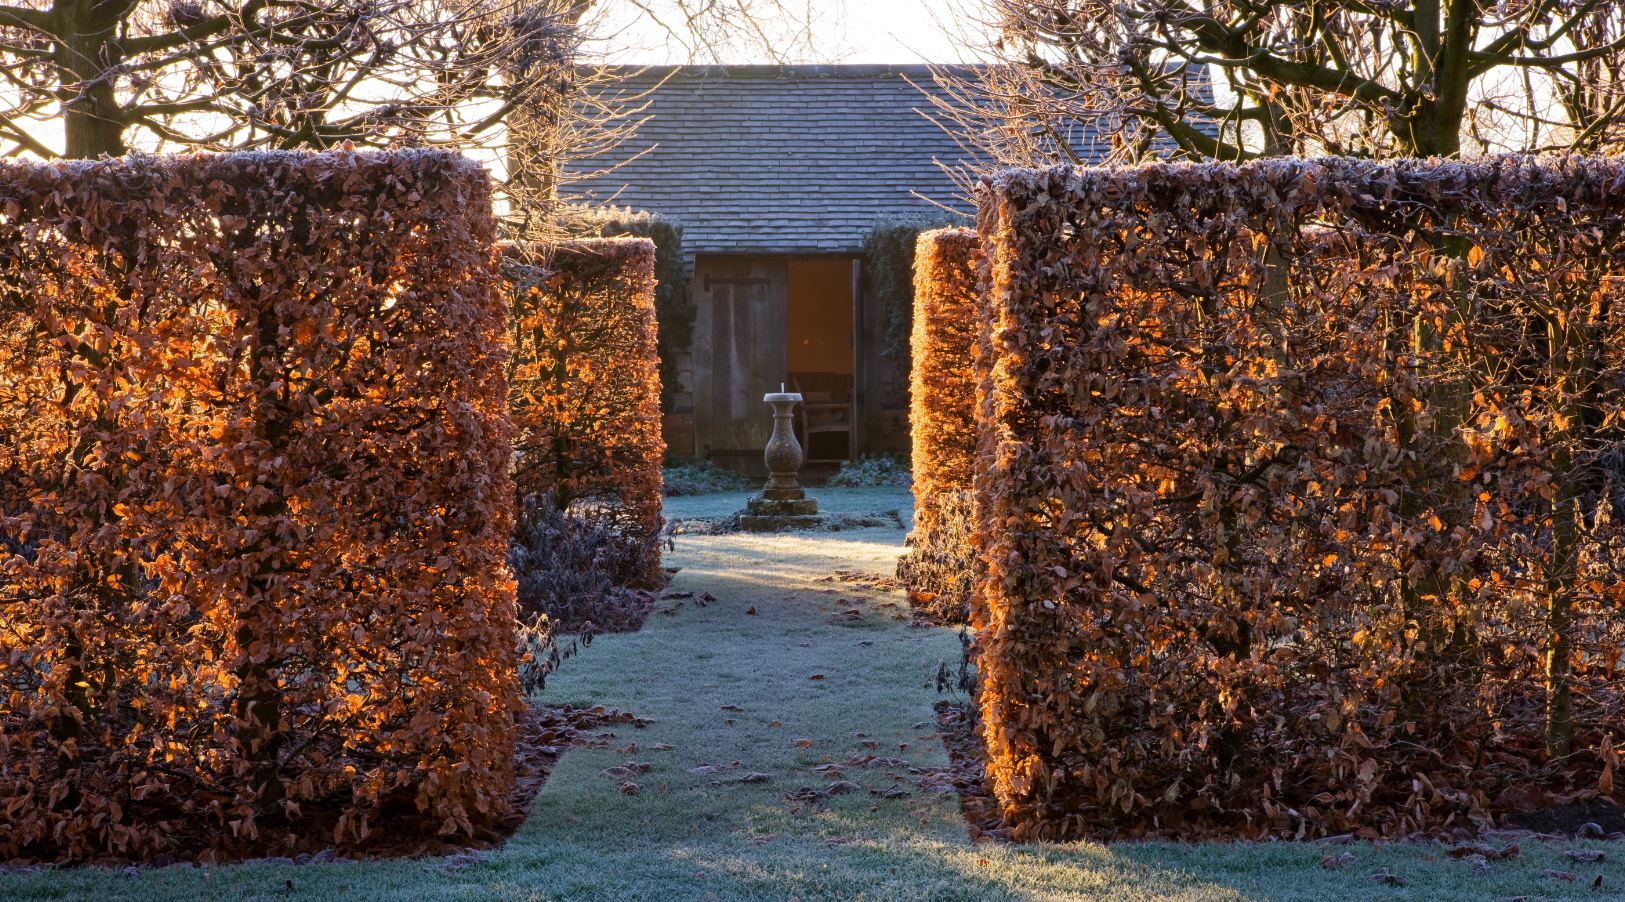 Instant Fagus wholesale hedging with the early morning sunshine lighting up the leaves